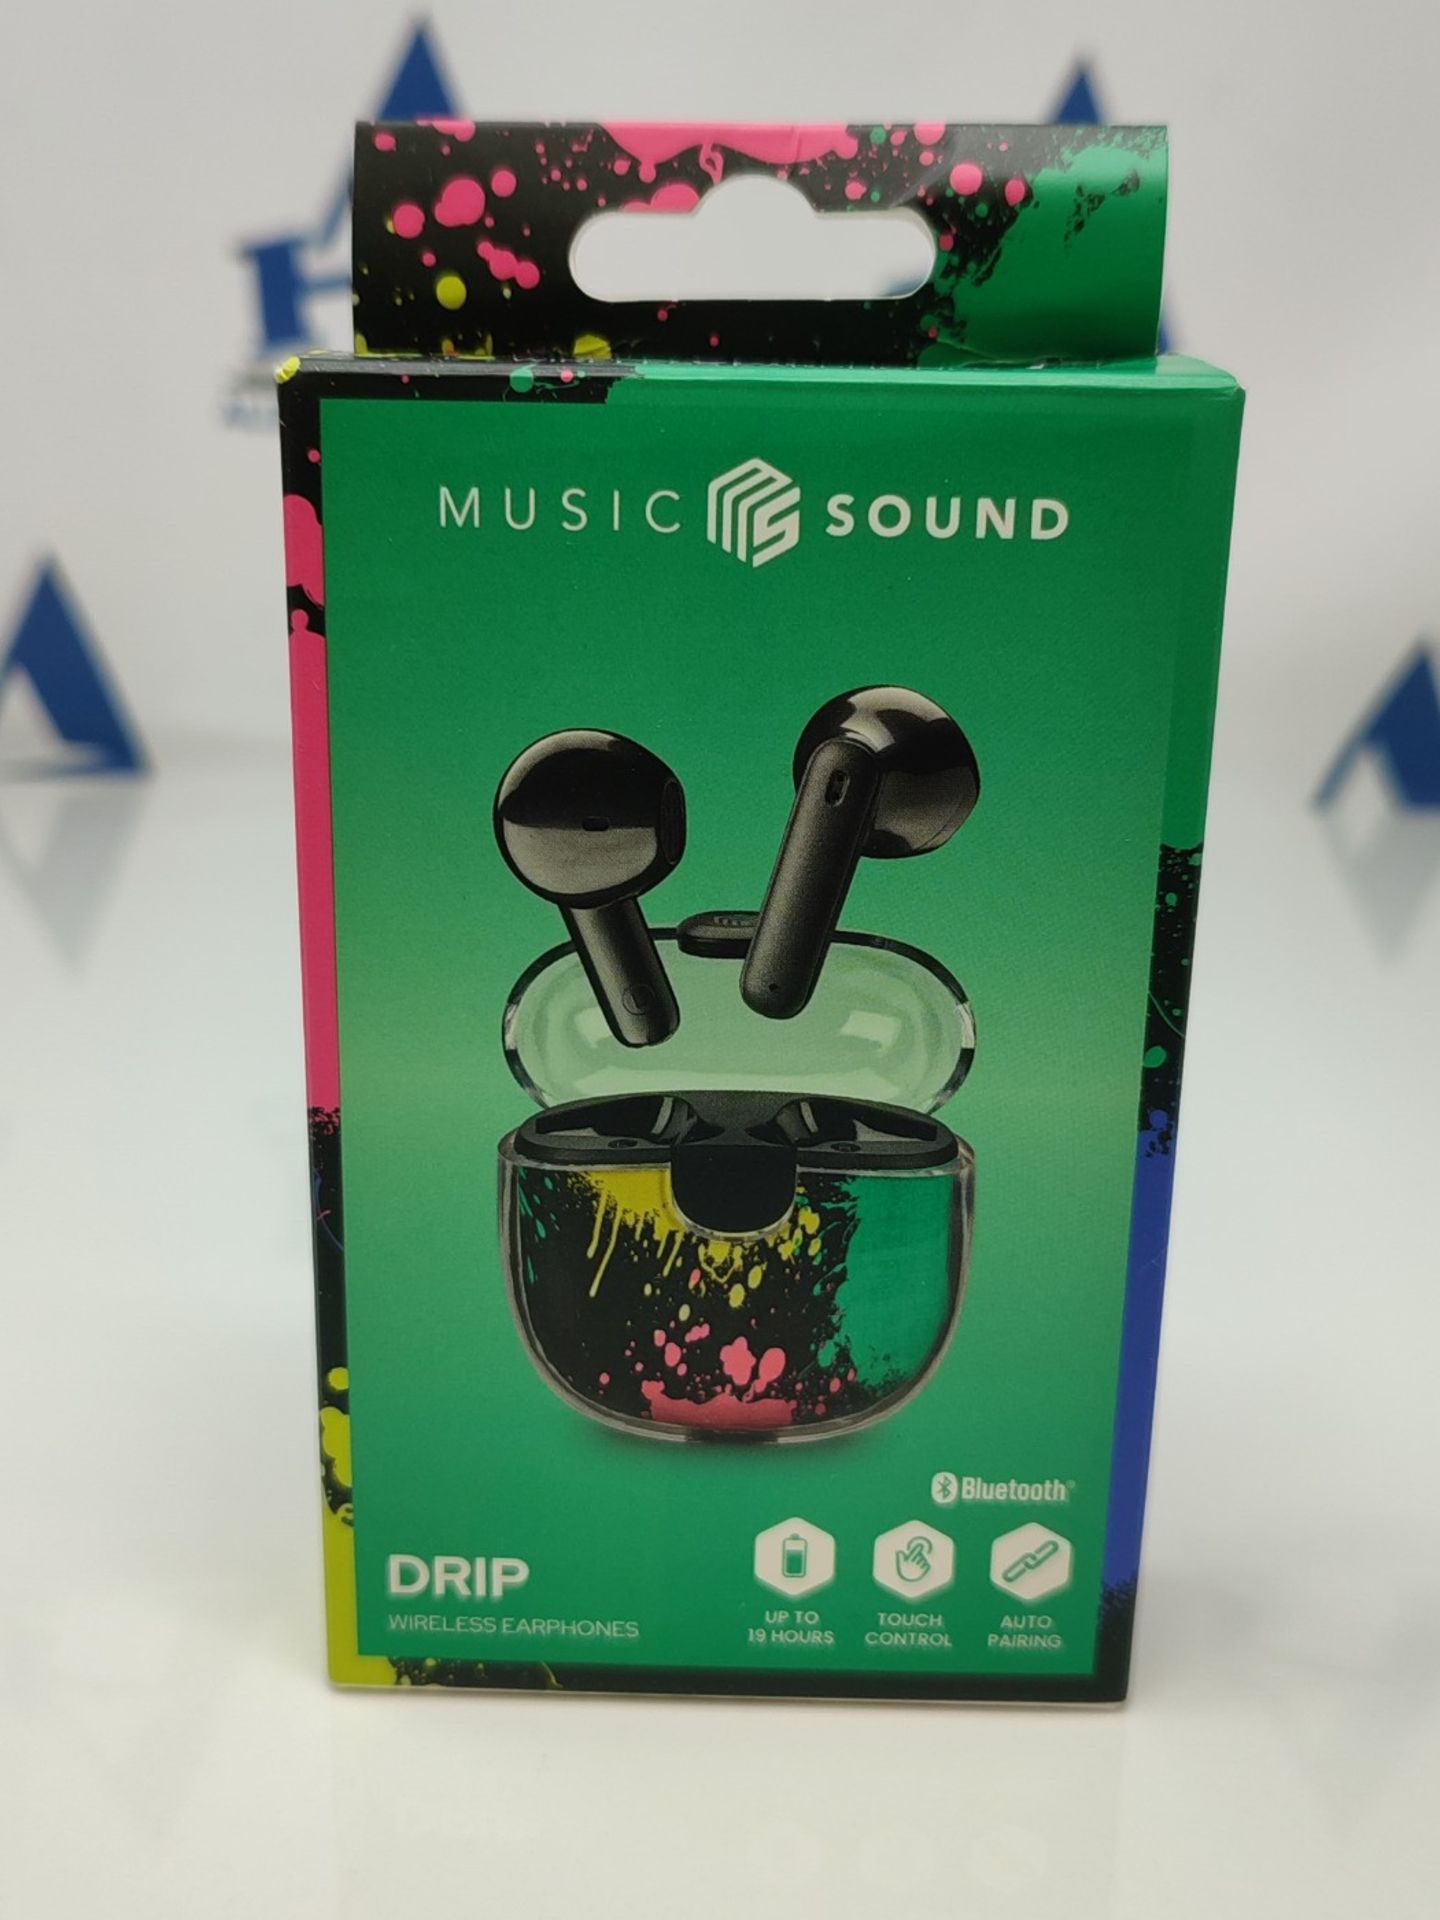 Music Sound | DRIP - Bluetooth earphone in capsule - Transparent case with fashionable - Image 2 of 3